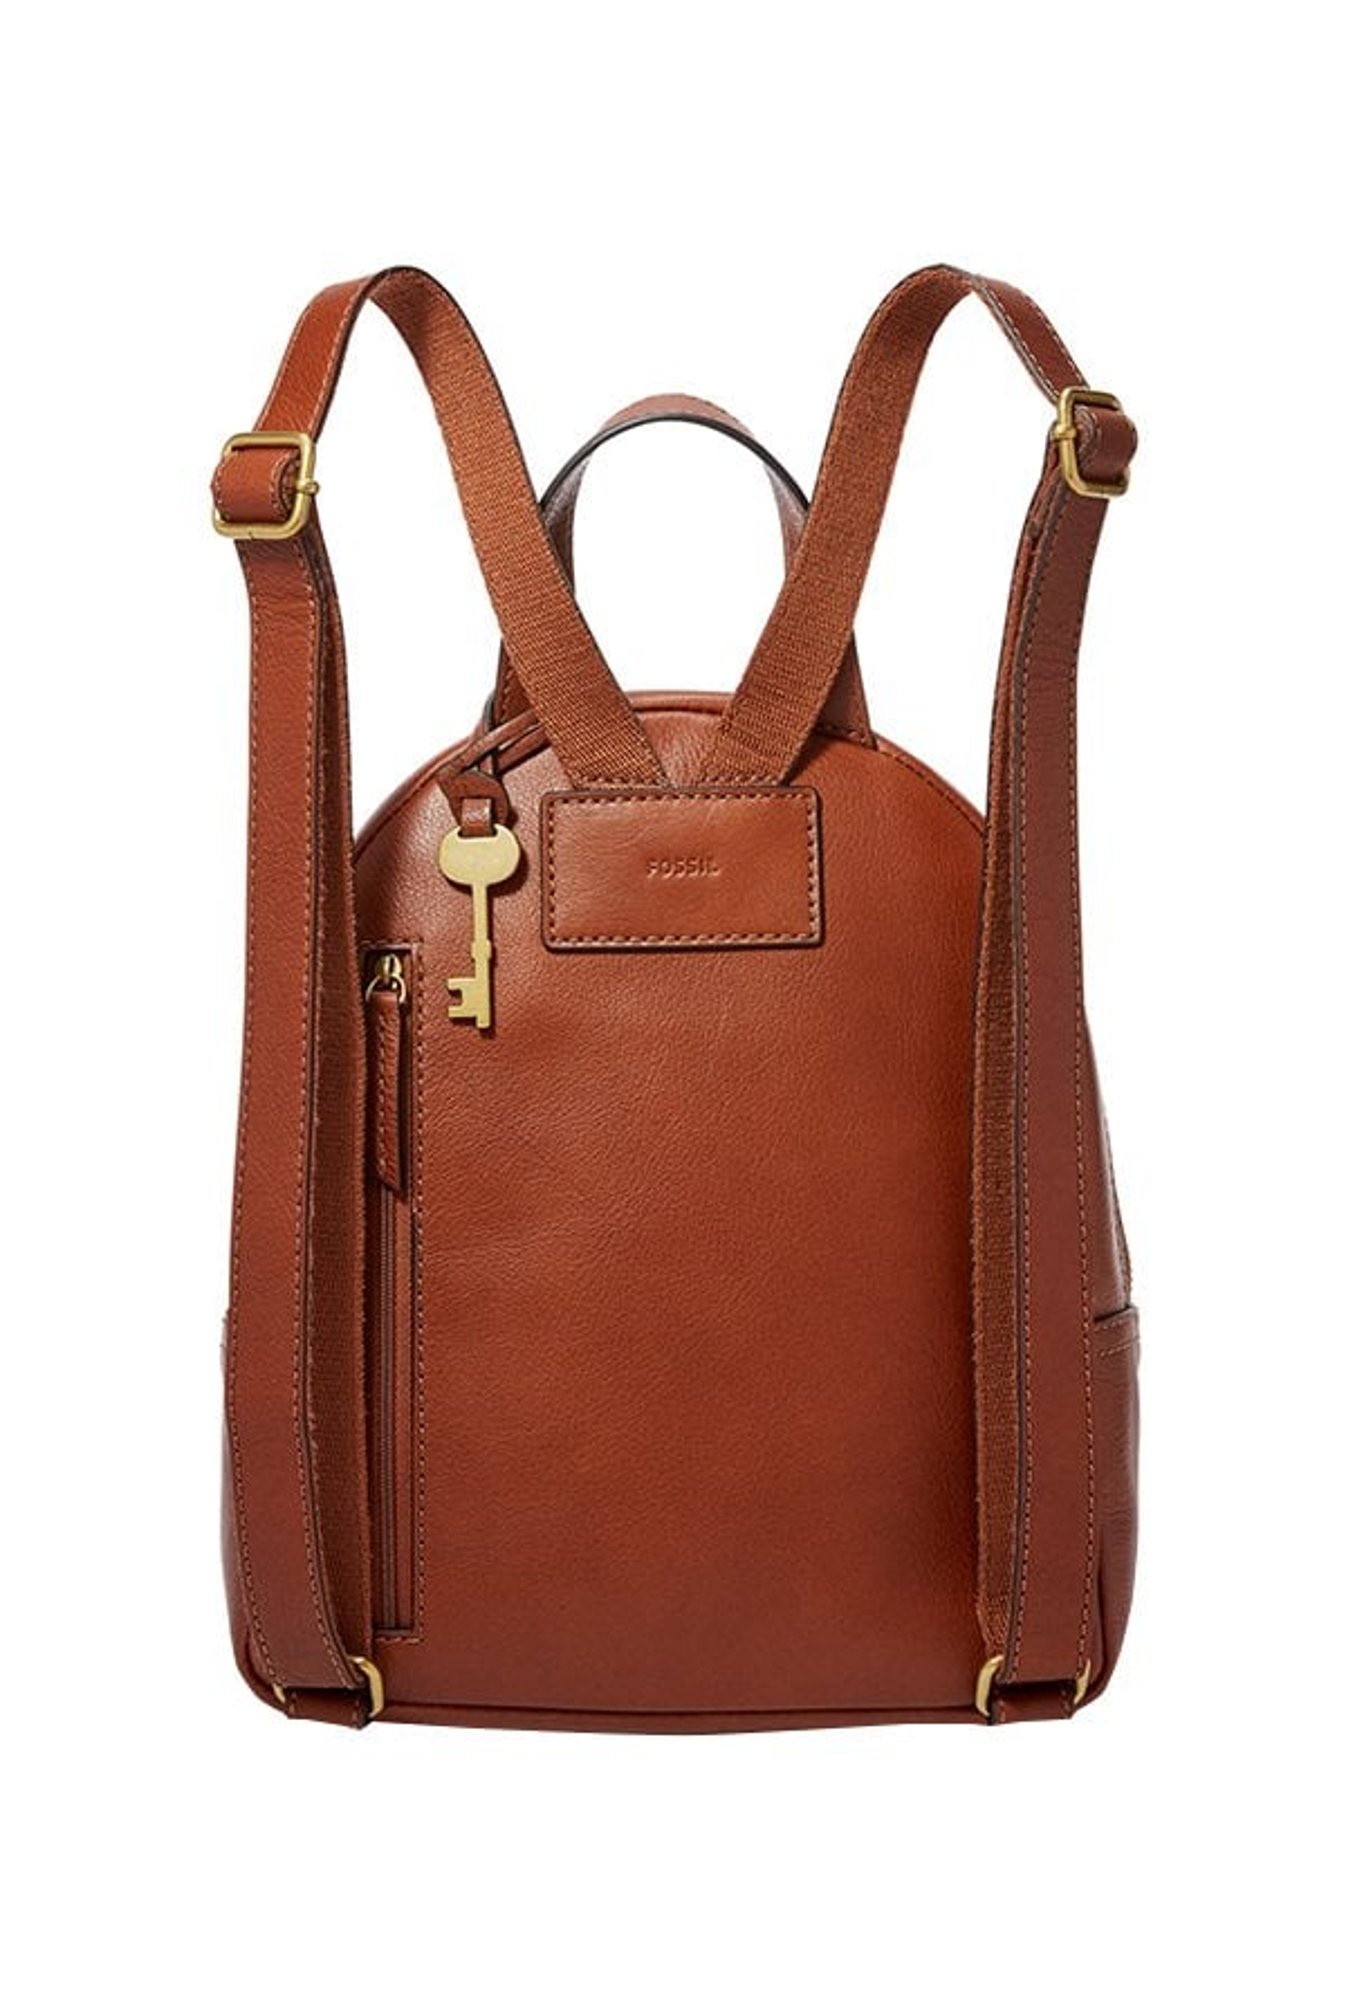 Fossil Laptop Bags : Buy Fossil Haskell Dark Brown Laptop Bag MBG9342206  Online | Nykaa Fashion